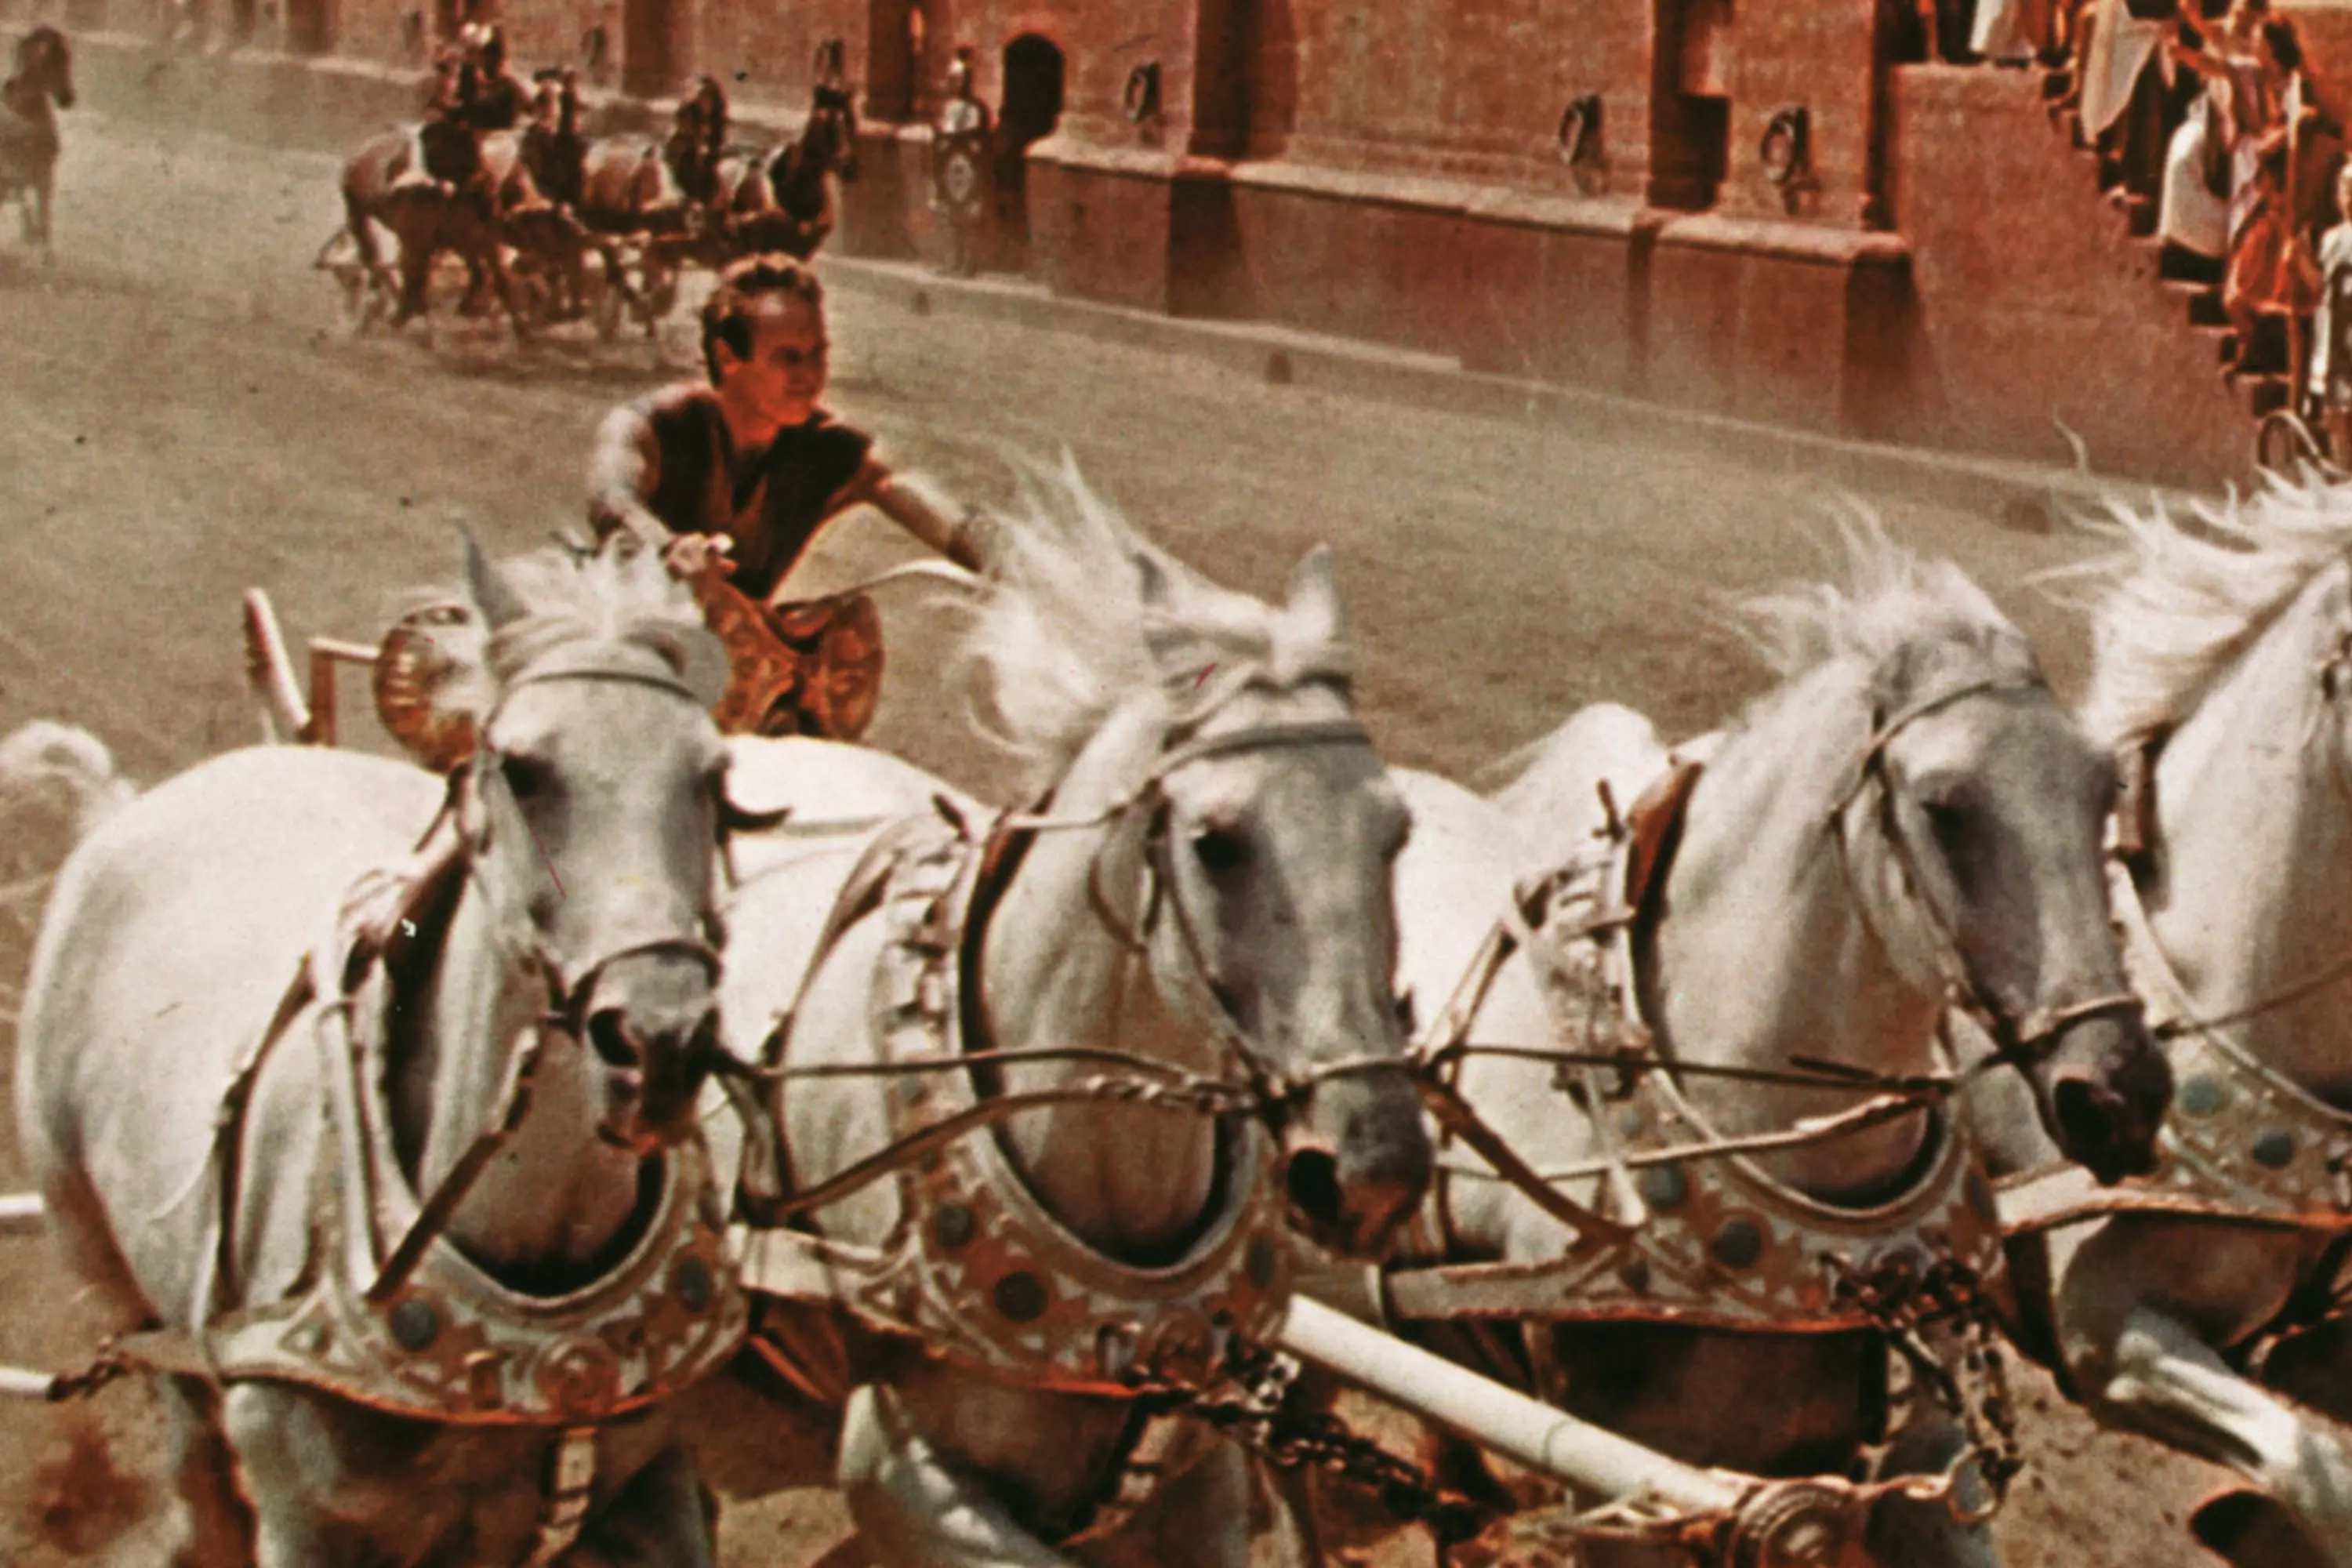 A man riding the chariot from Ben-Hur (1959)